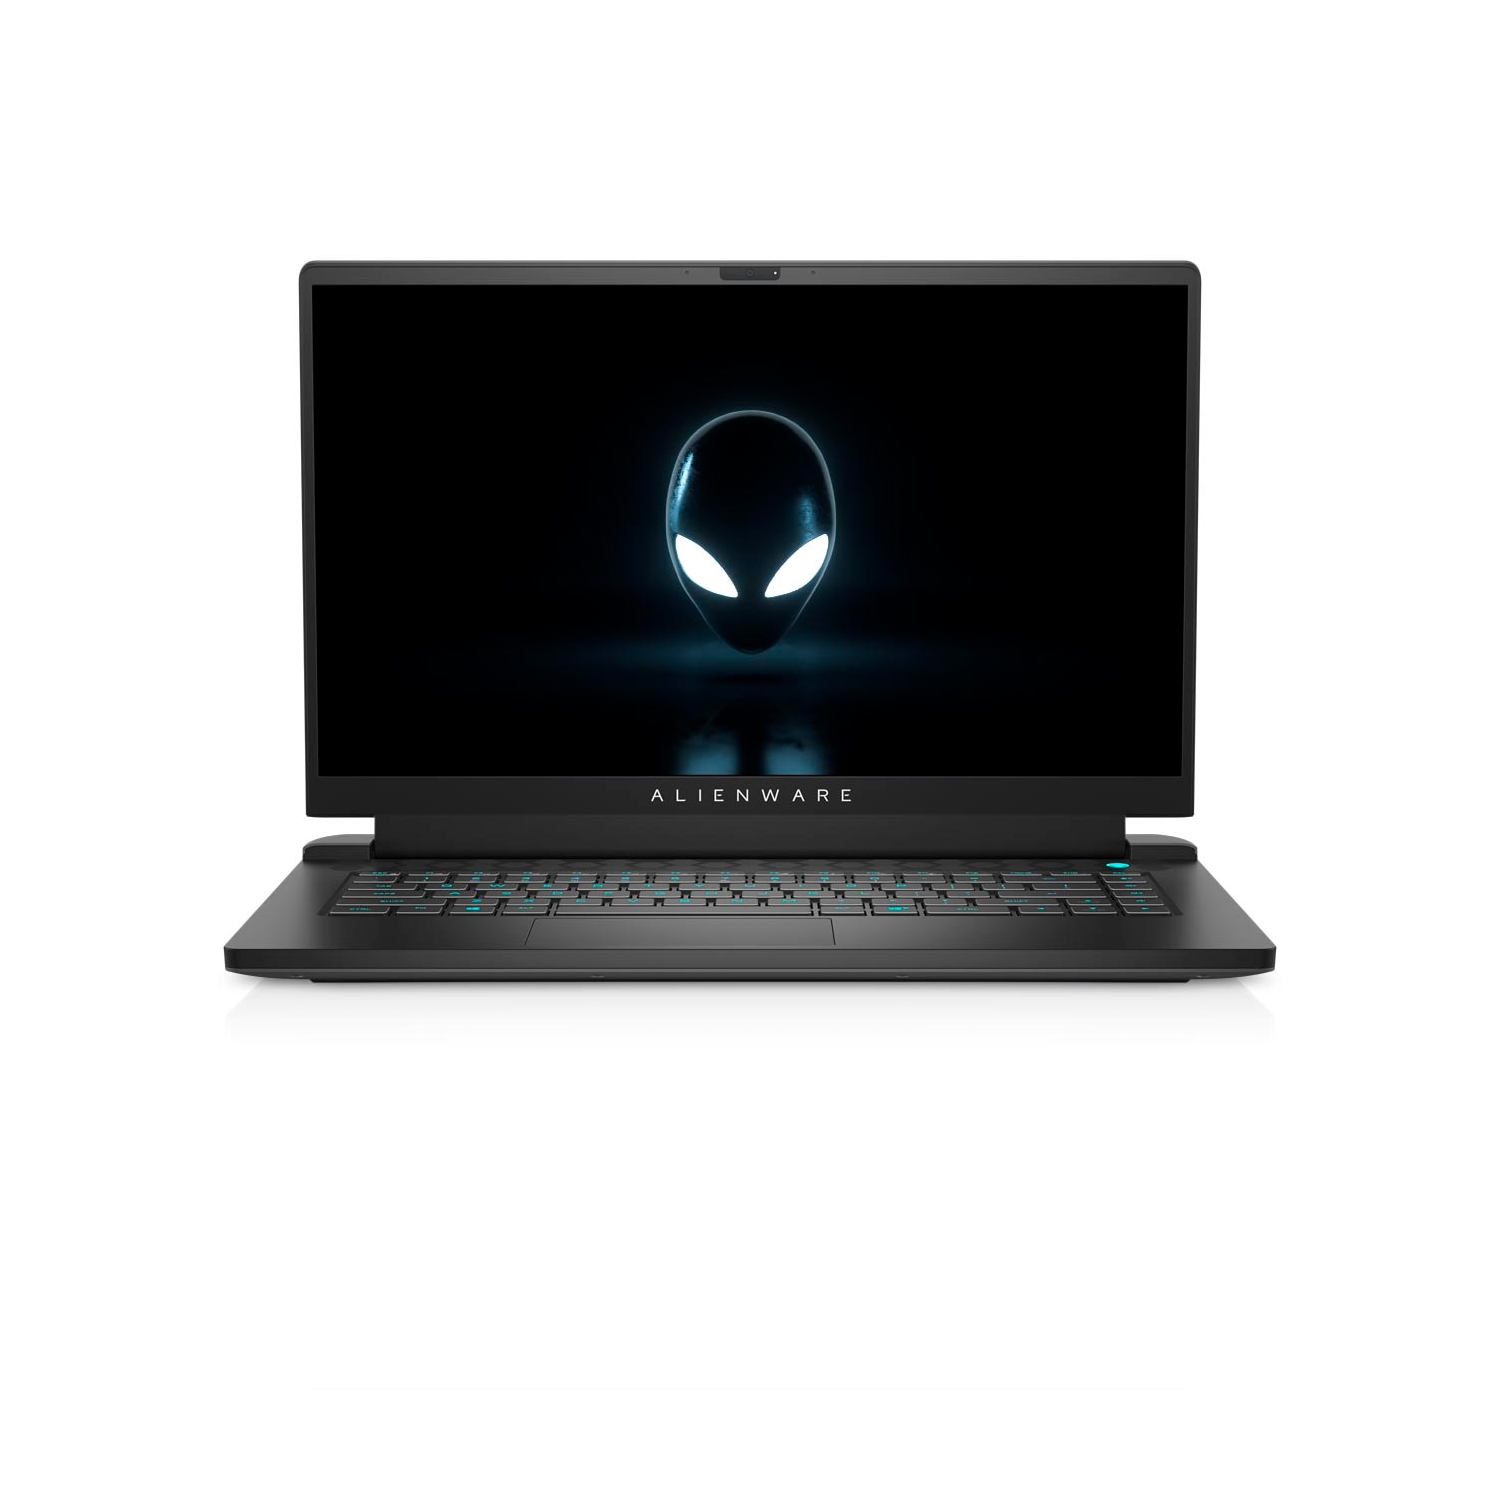 Refurbished (Excellent) - Dell Alienware m15 R5 Ryzen Edition Gaming Laptop (2021), 15.6" FHD, Core Ryzen 7, 256GB SSD, 16GB RAM, RTX 3060, 8 Cores @ 4.4 GHz Certified